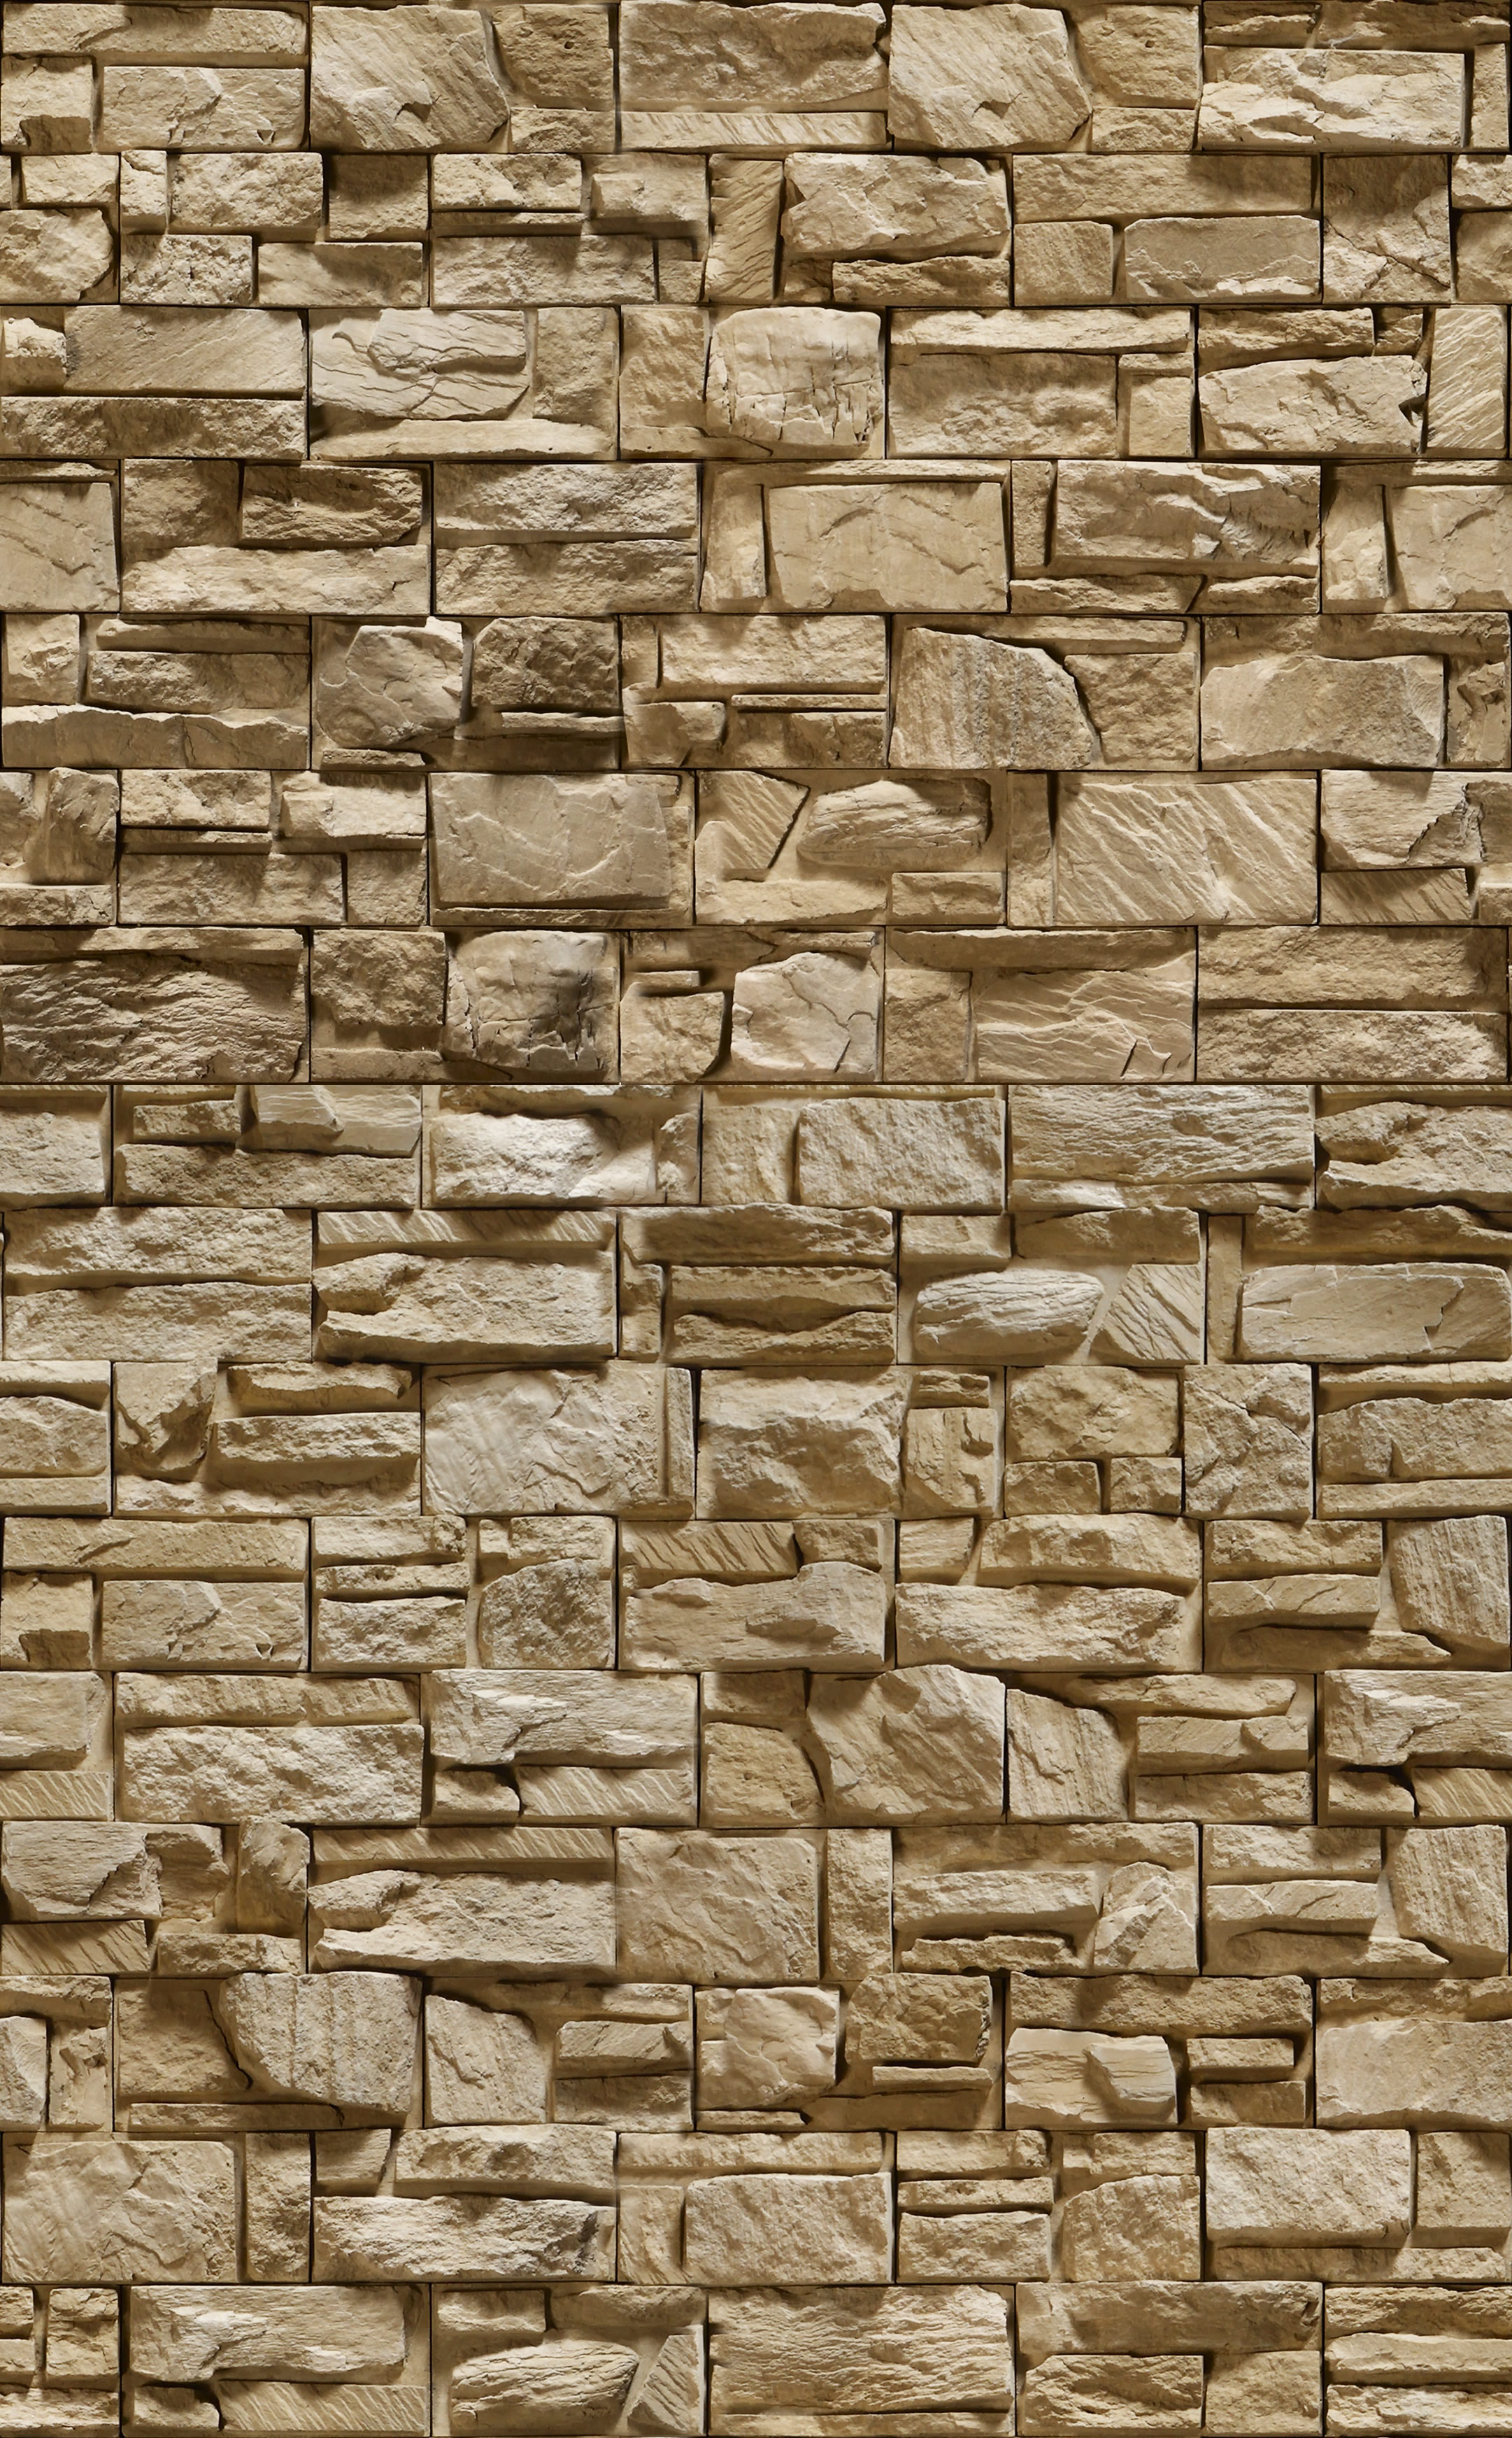 stone, wall, texture stone, stone wall, download background, brown stone background